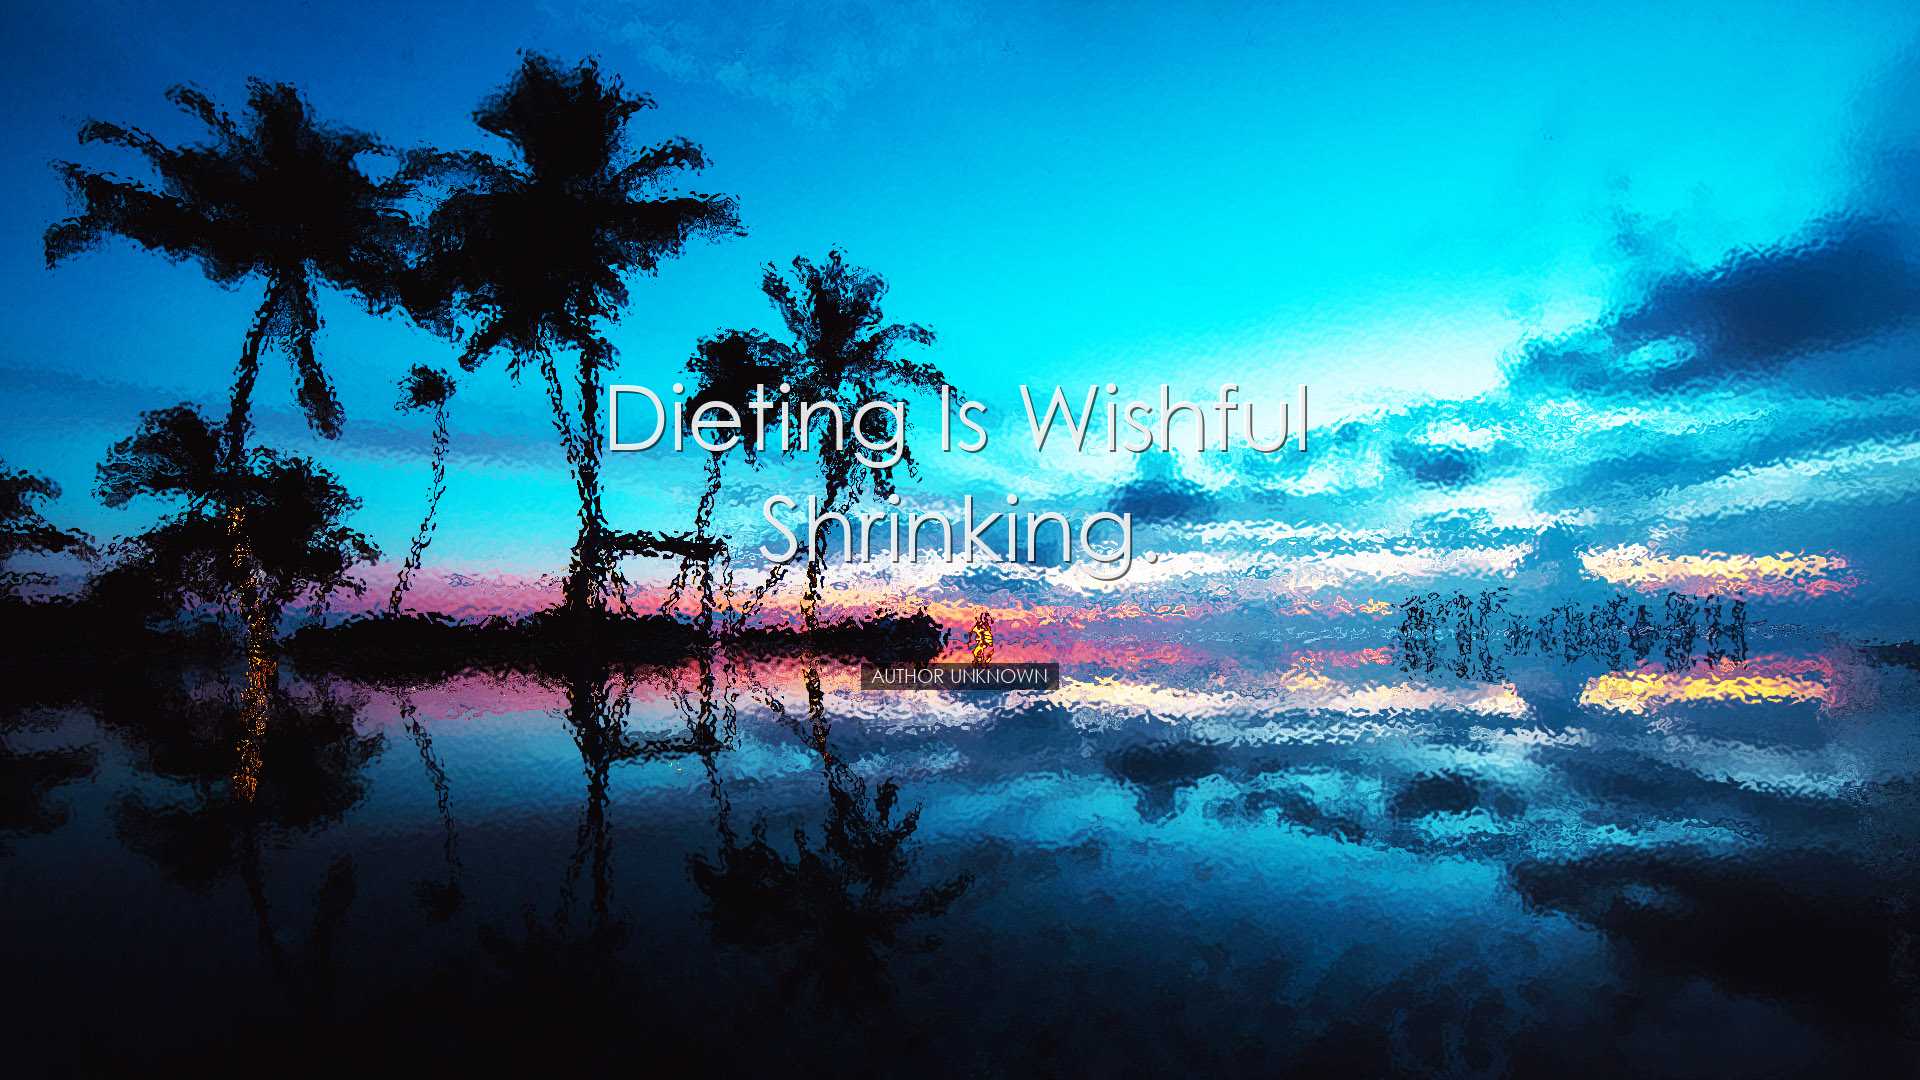 Dieting is wishful shrinking. - Author unknown